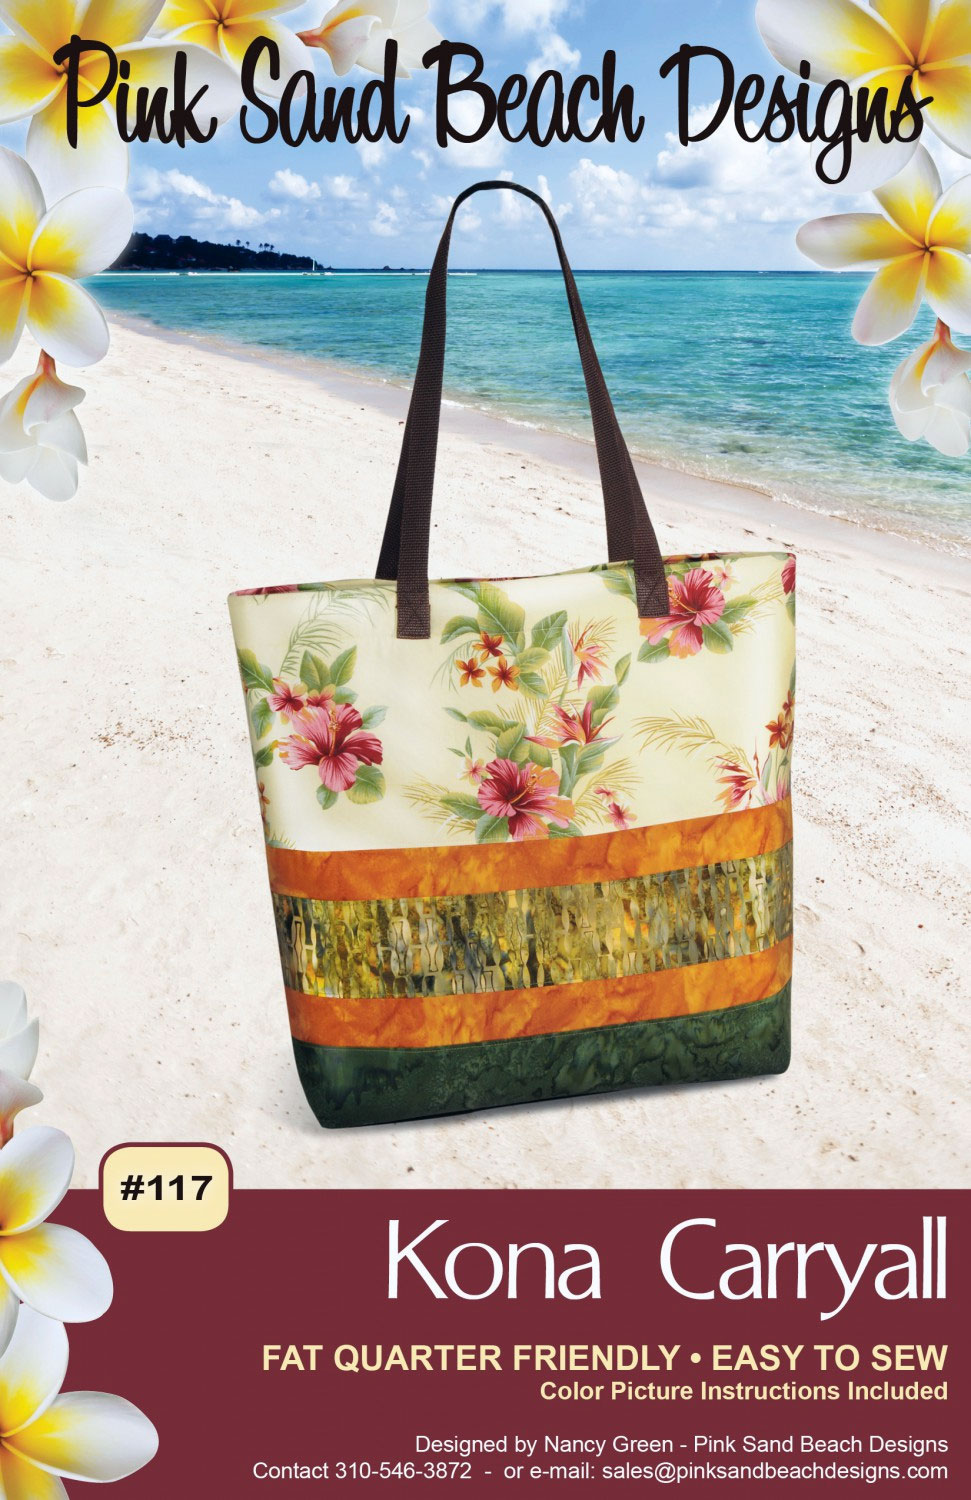 Kona-Carryall-sewing-pattern-Pink-Sand-Beach-Designs-front